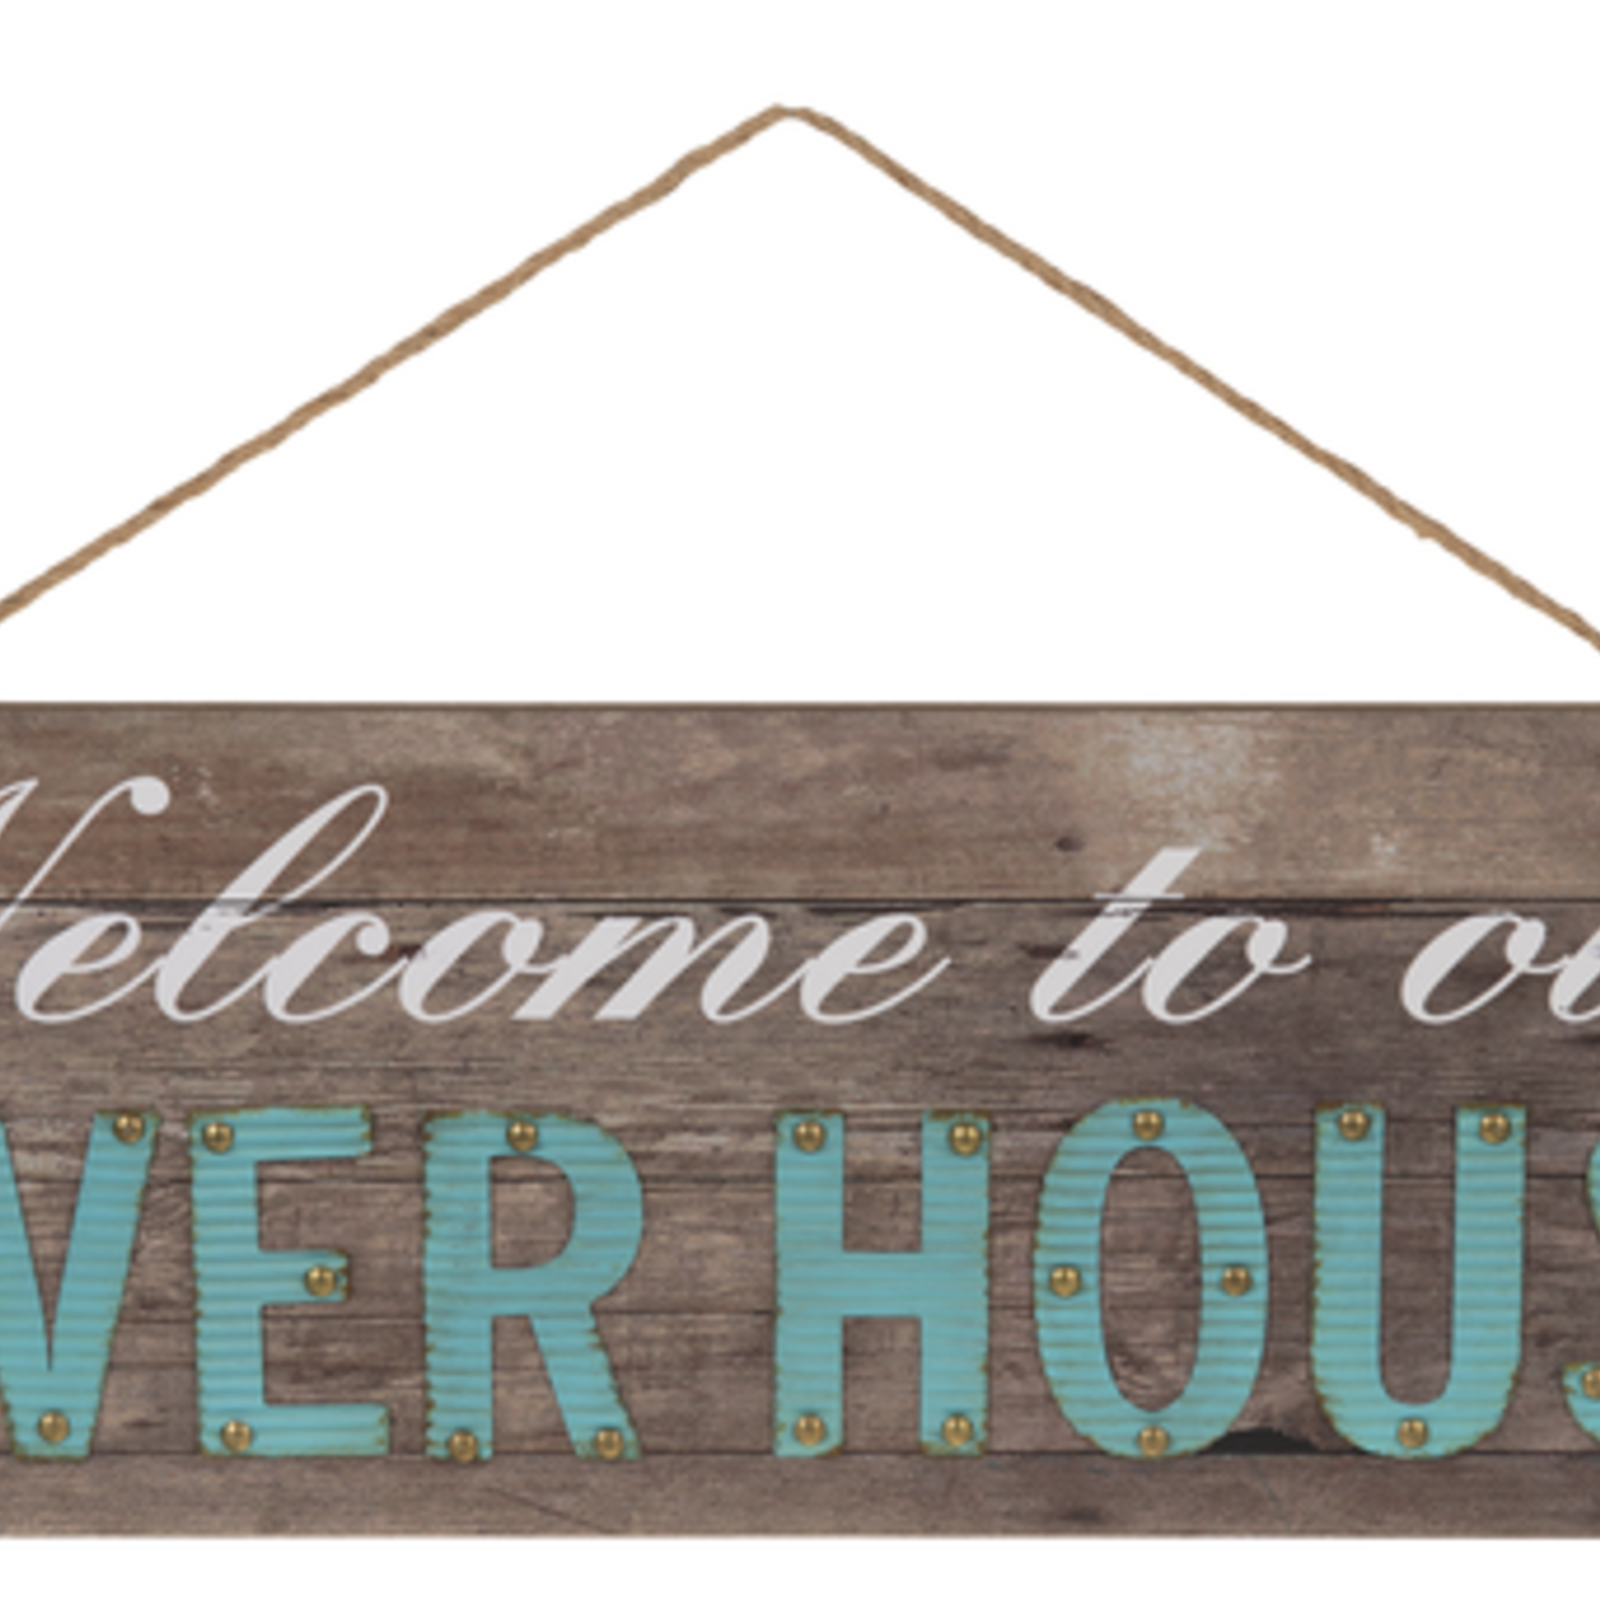 Ganz "Welcome to Our River House" Sign loading=